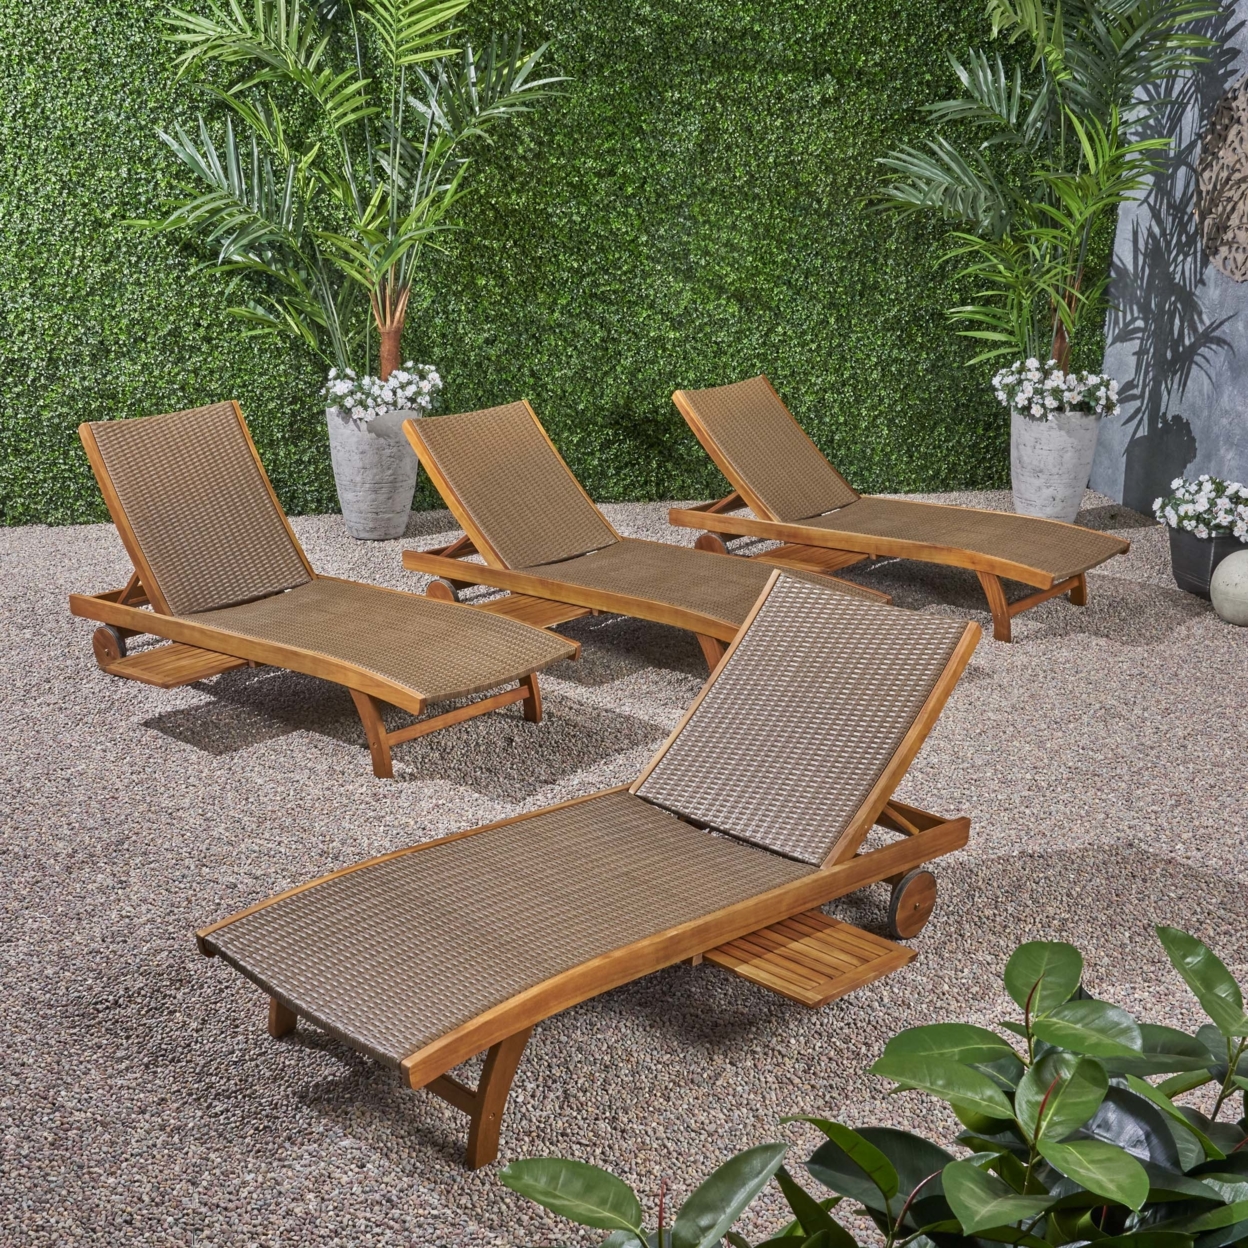 Yedda Outdoor Wicker And Wood Chaise Lounge With Pull-Out Tray - Brown, Set Of 4